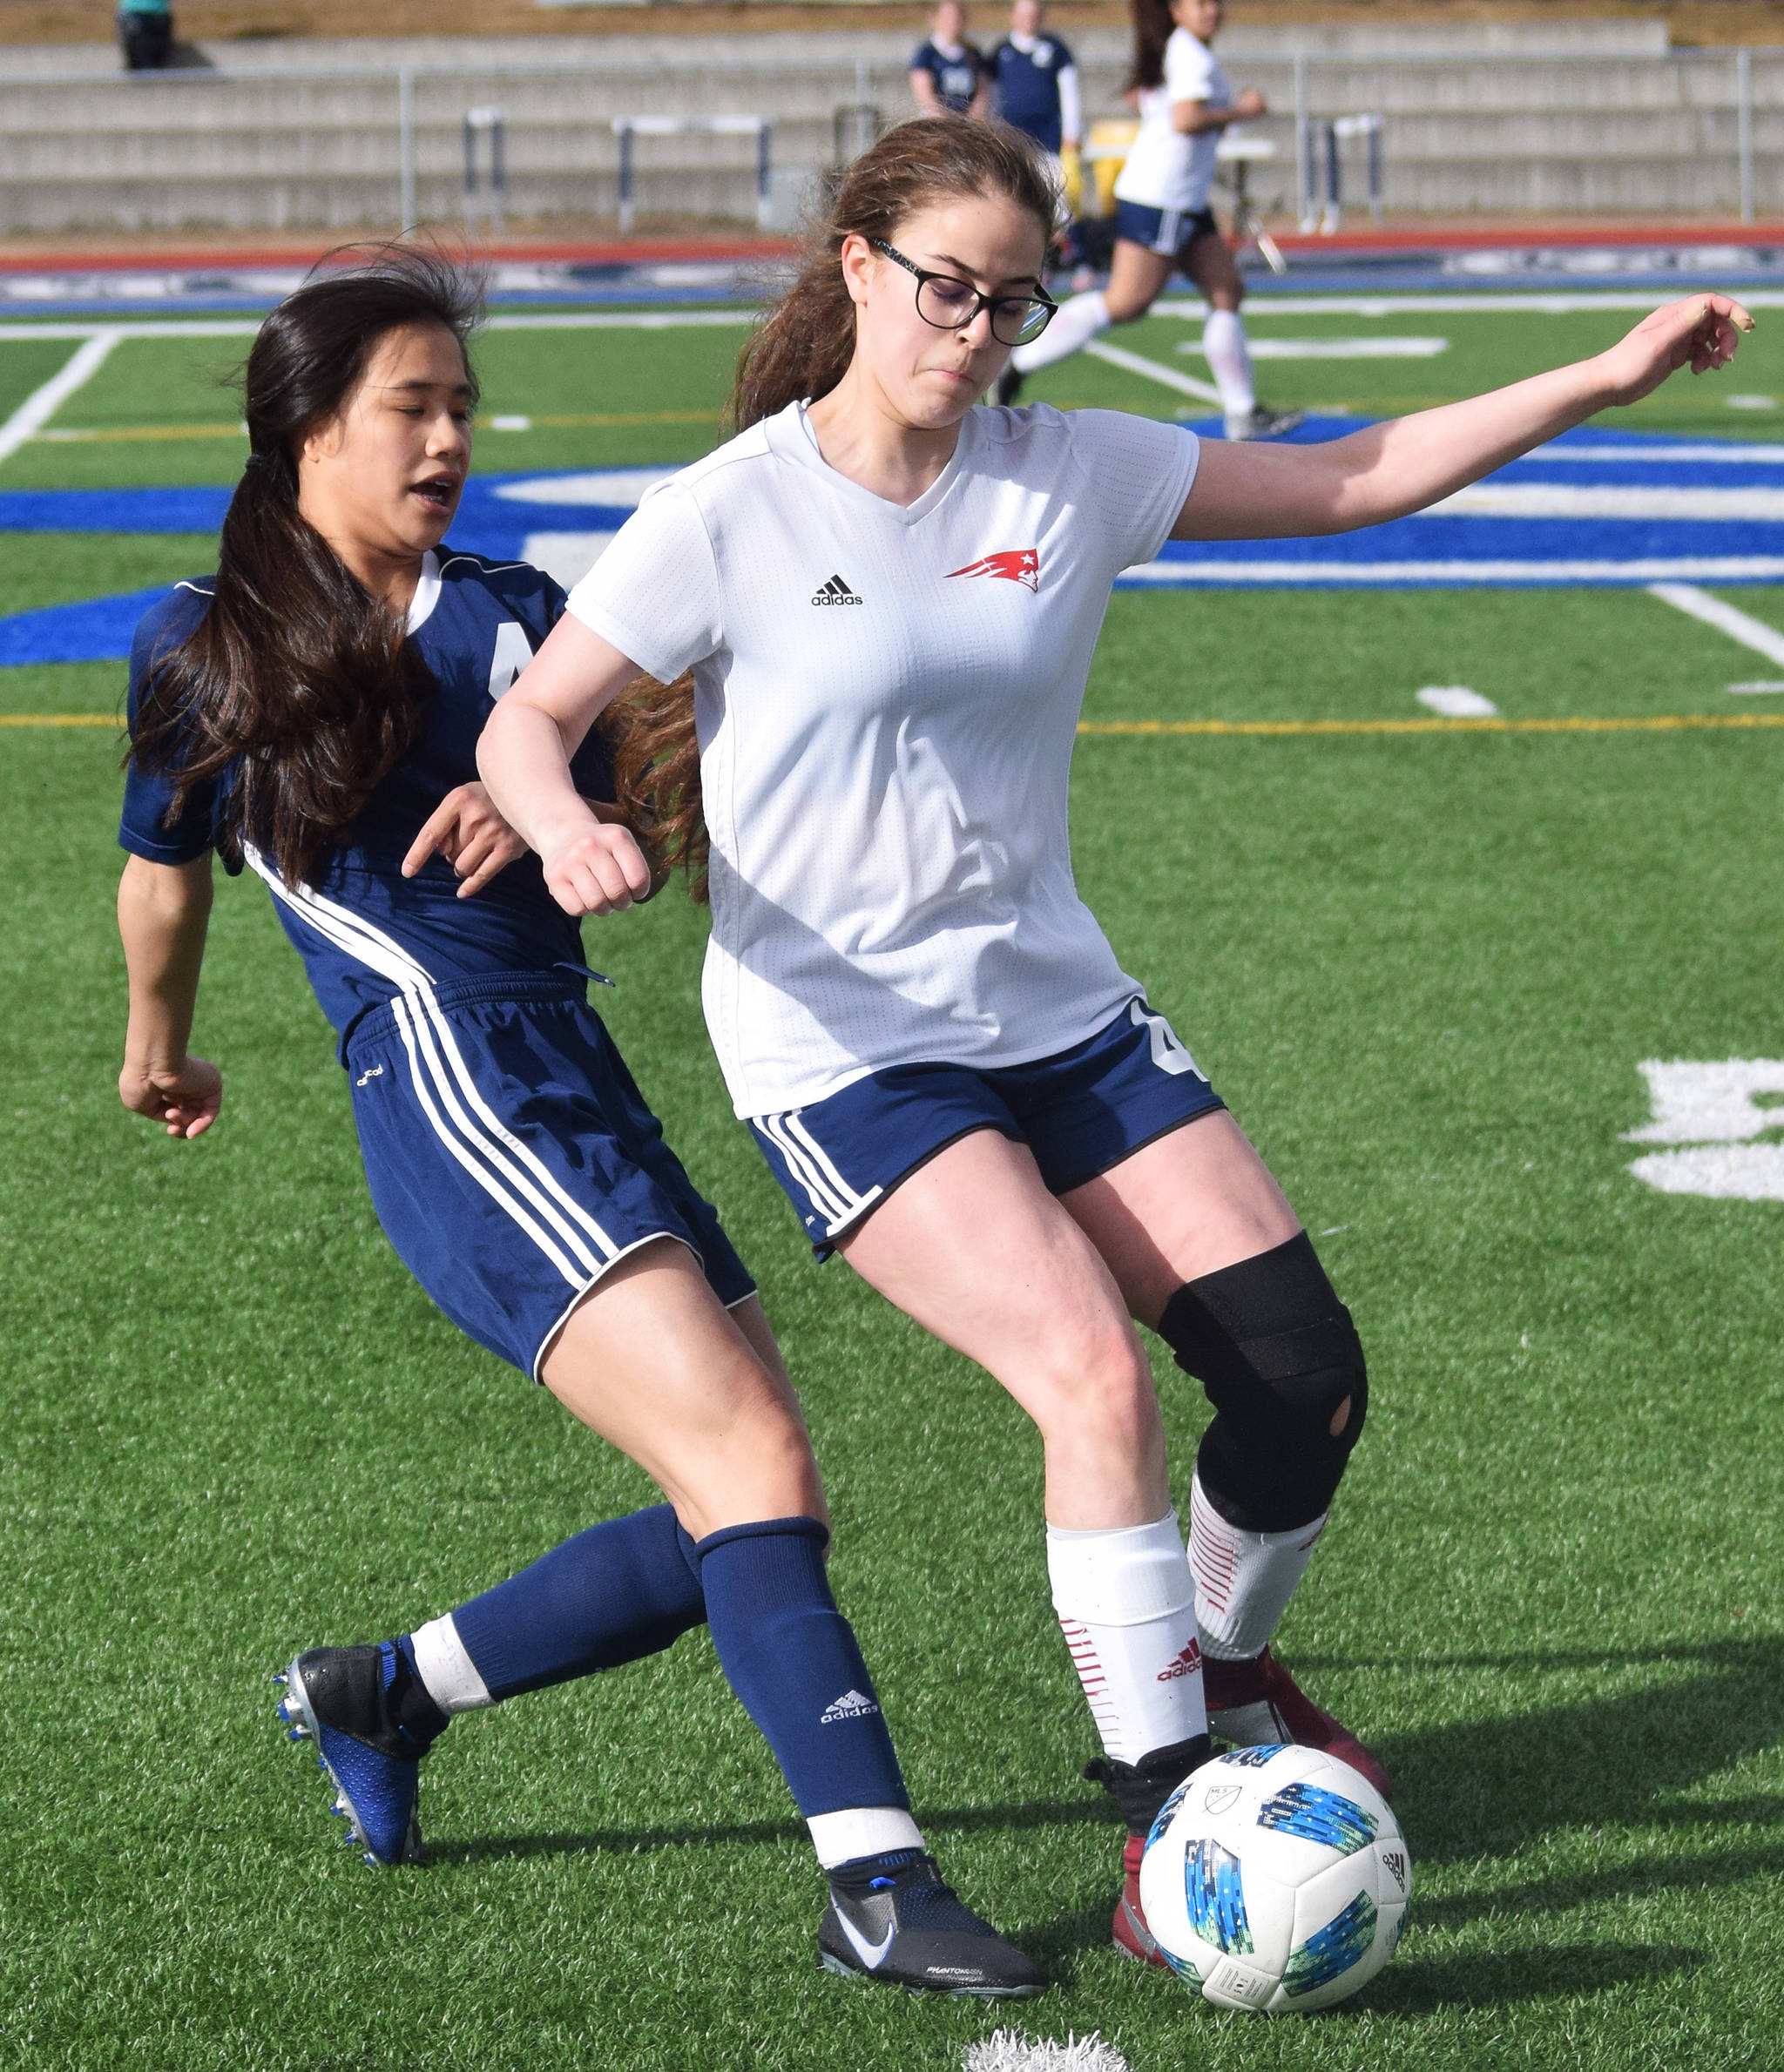 Soldotna’s Meijan Leaf (left) attempts to steal the ball from North Pole’s Abby Taylor Friday, April 12, 2019, in a nonconference game at Soldotna High School. (Photo by Joey Klecka/Peninsula Clarion)